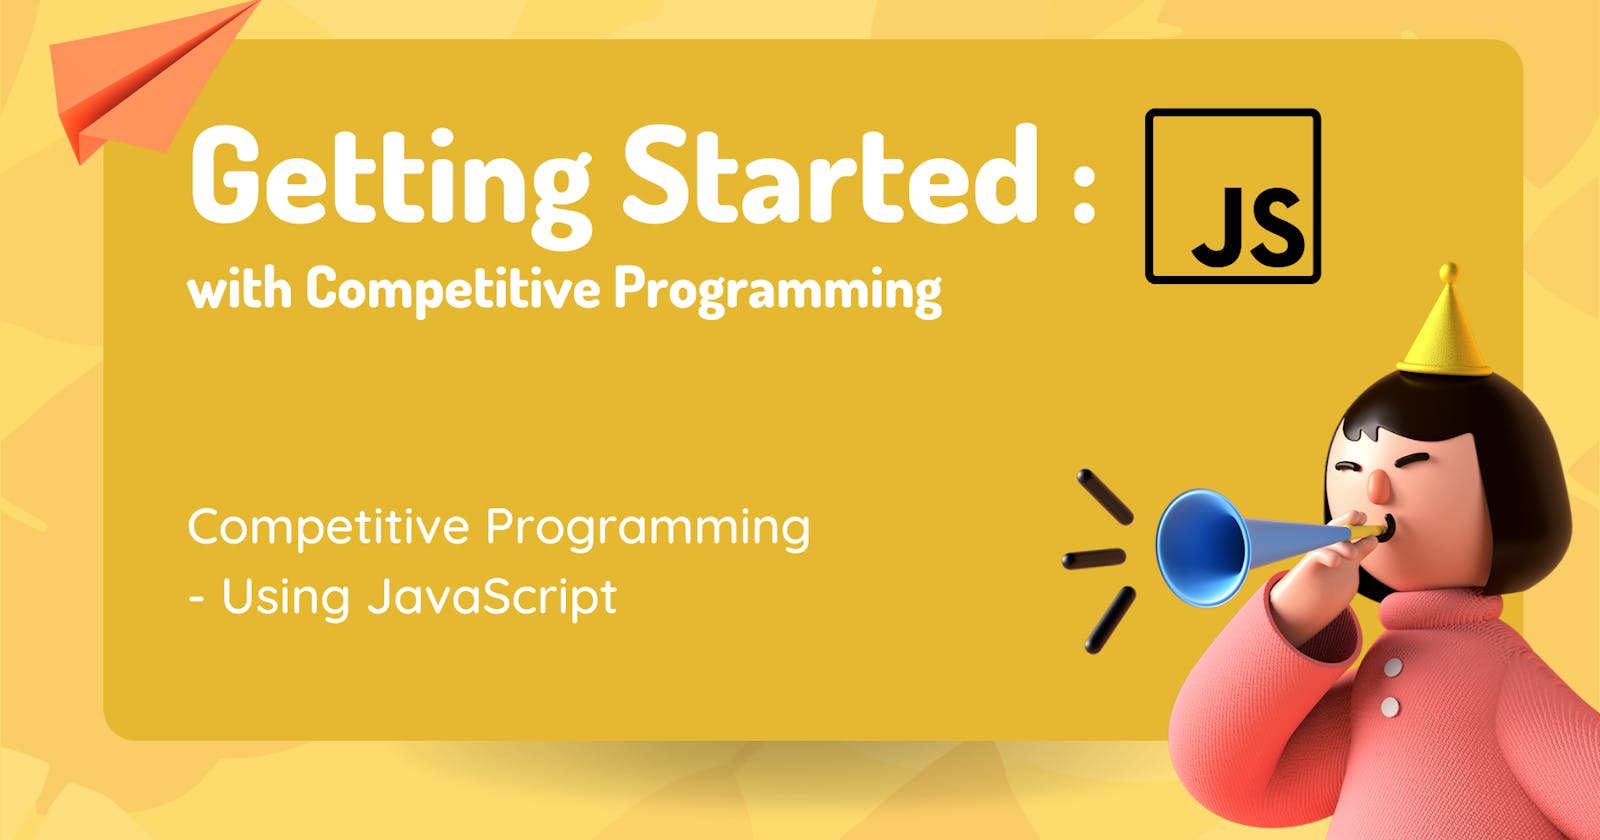 Getting Started with Competitive Programming in JavaScript